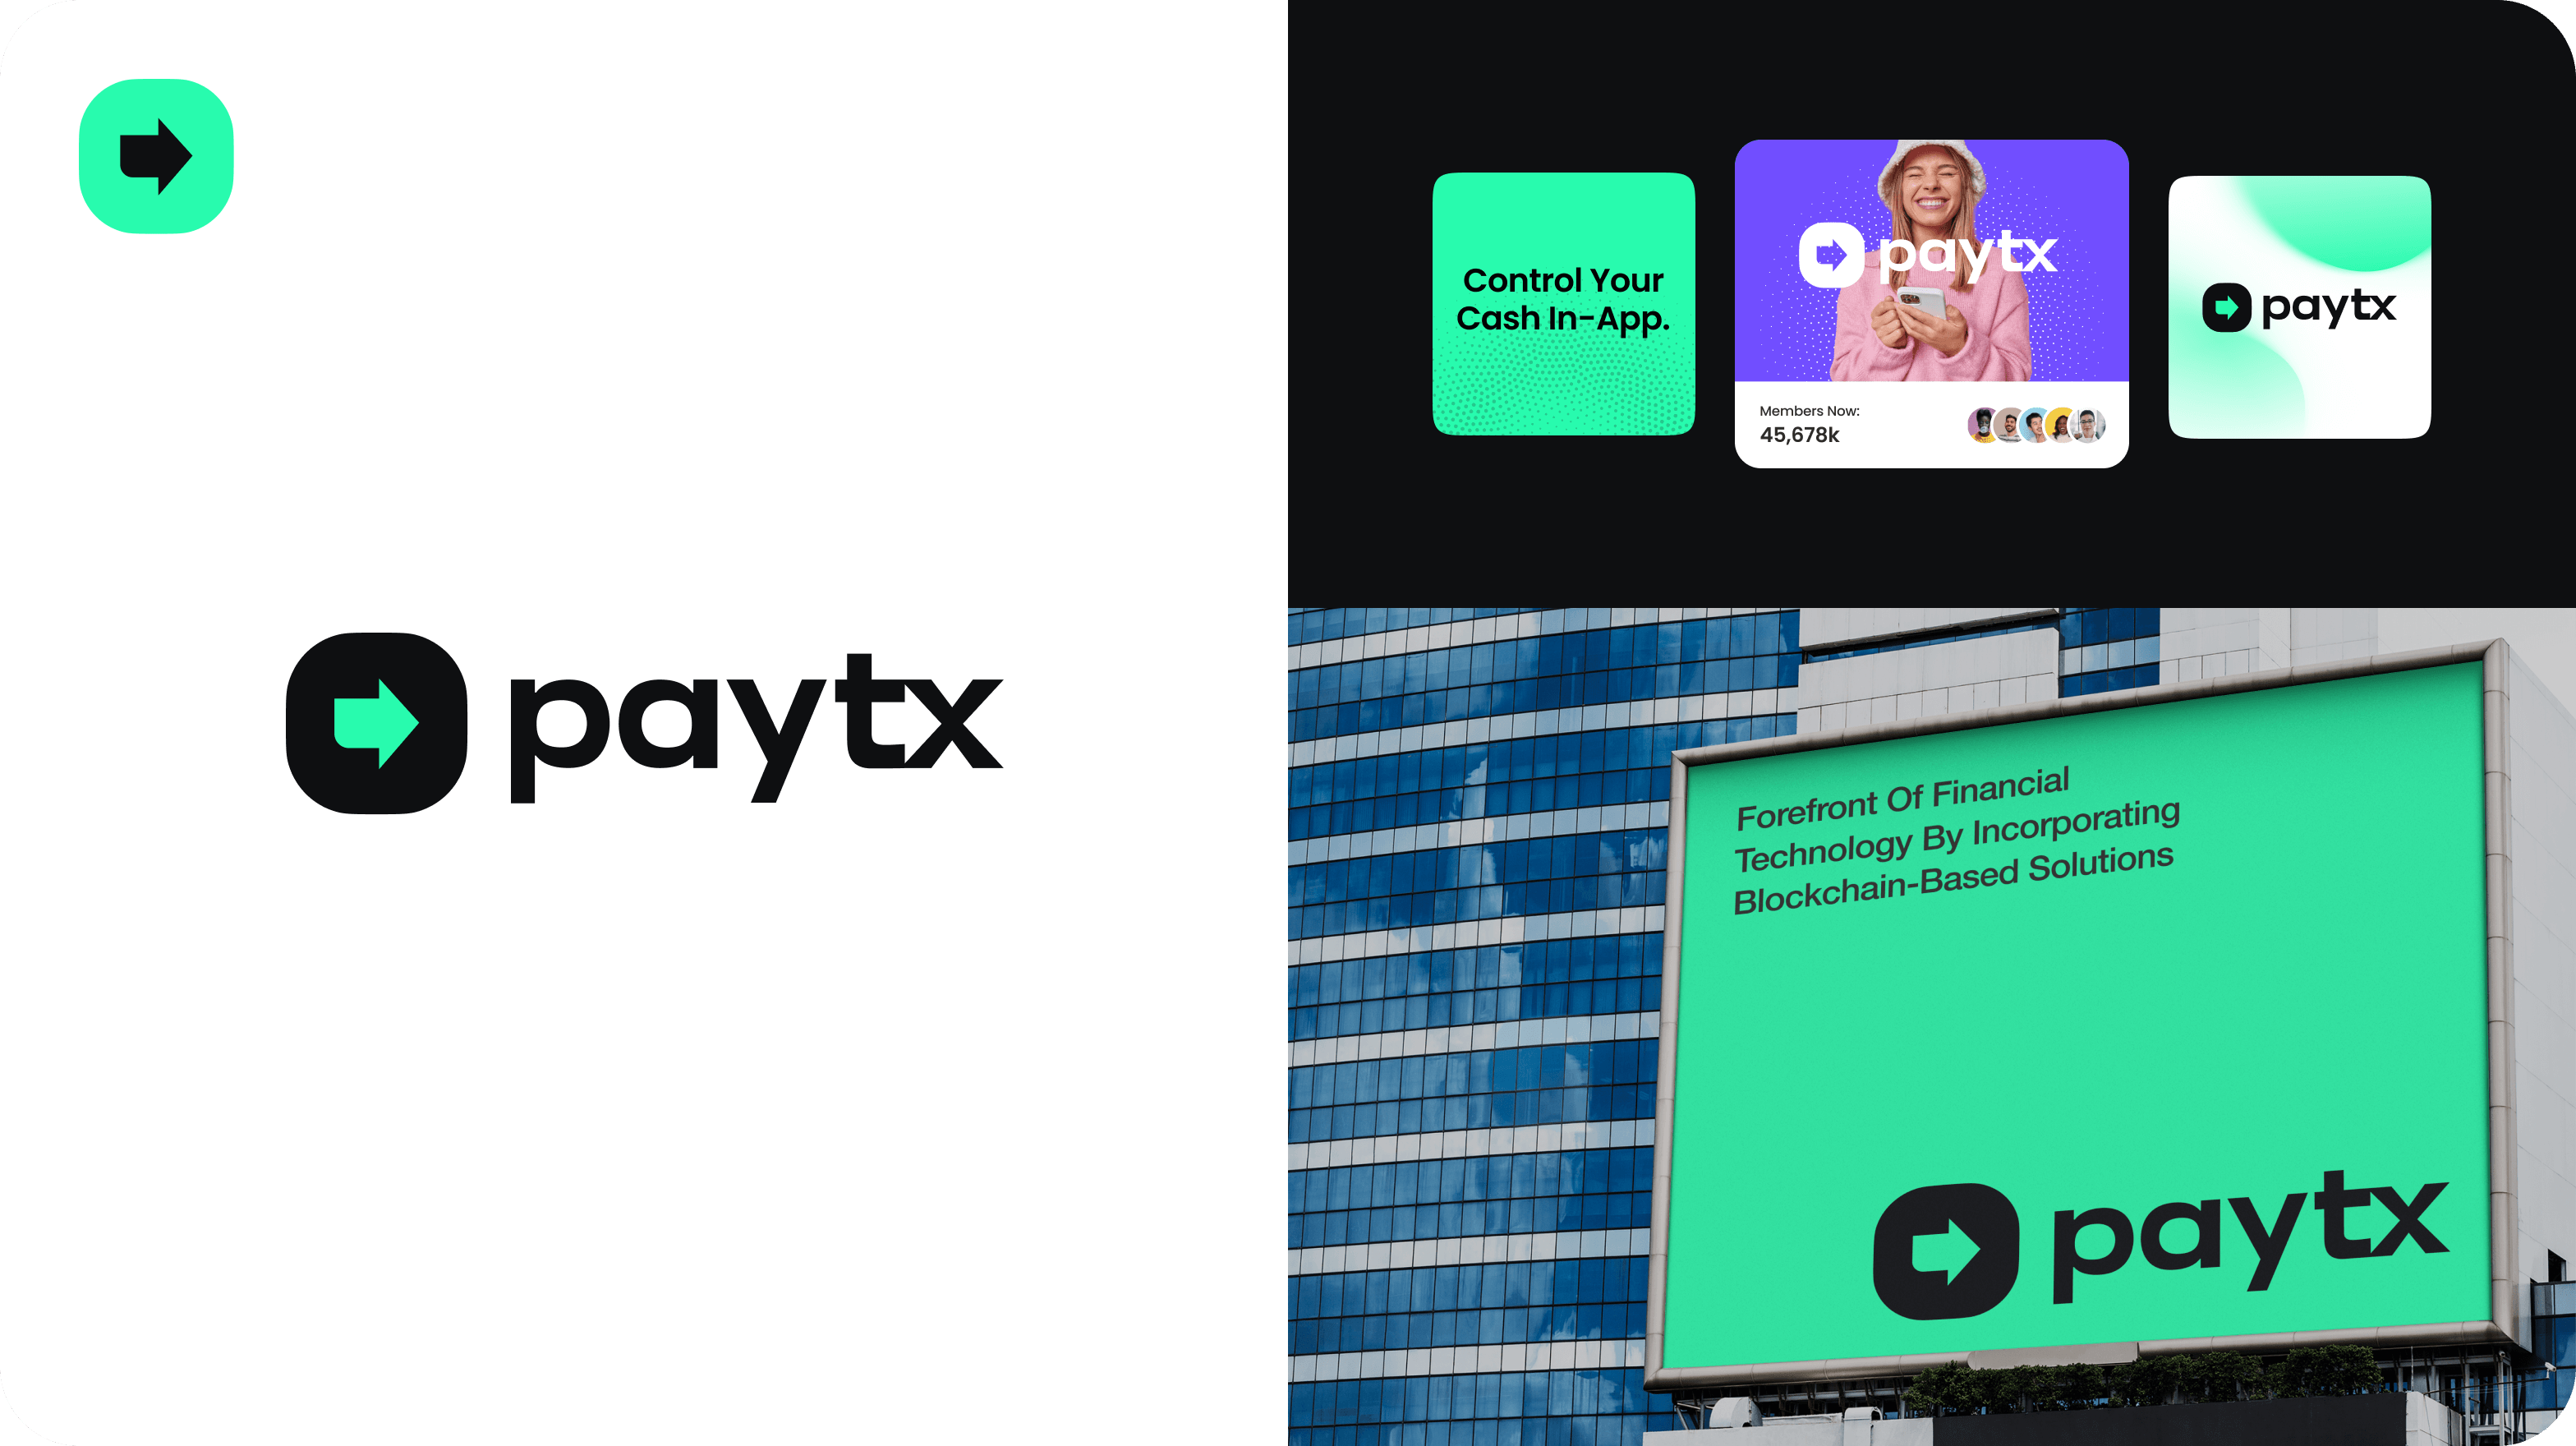 Goodface agency - Logos & brand identity - PayTX case.png - Brand identity and logo design services – Goodface agency  - goodface.agency